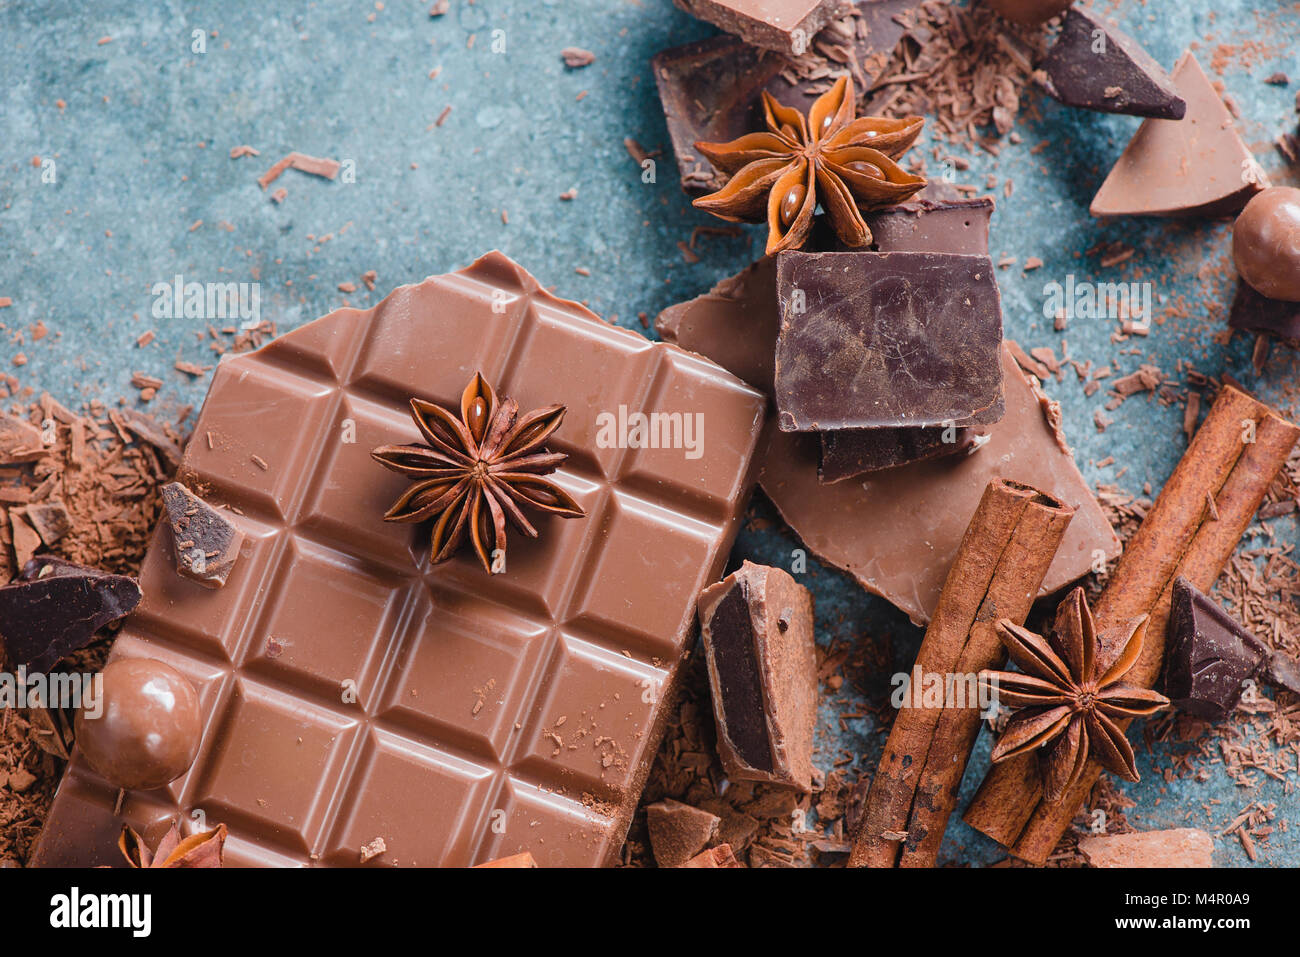 Chocolate pieces with spices and scattered cocoa on a stone background. Confectionery food photography. Dessert ingredients close-up. Stock Photo